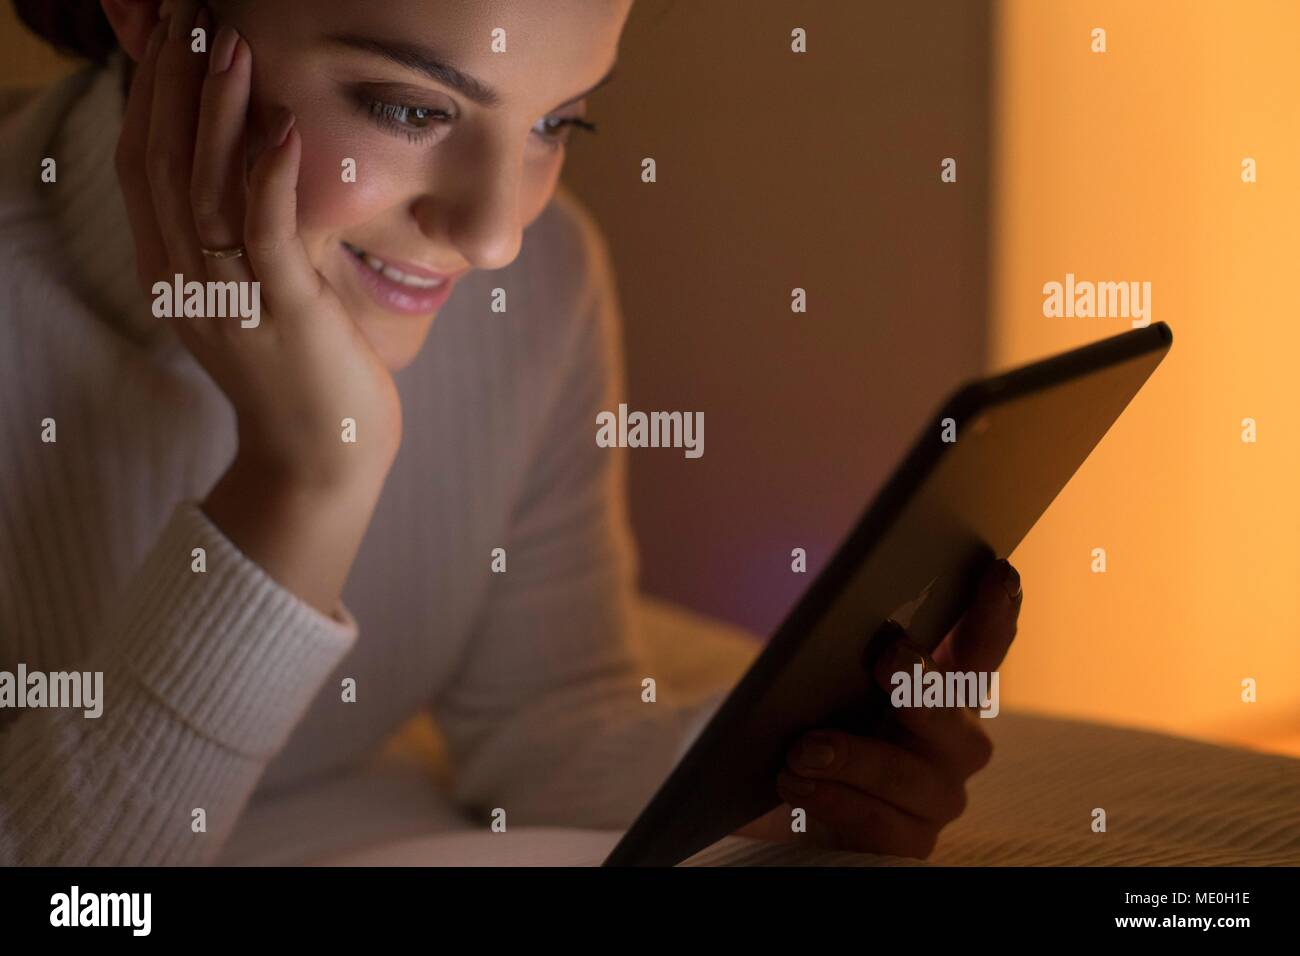 Young woman using digital tablet, smiling. Stock Photo